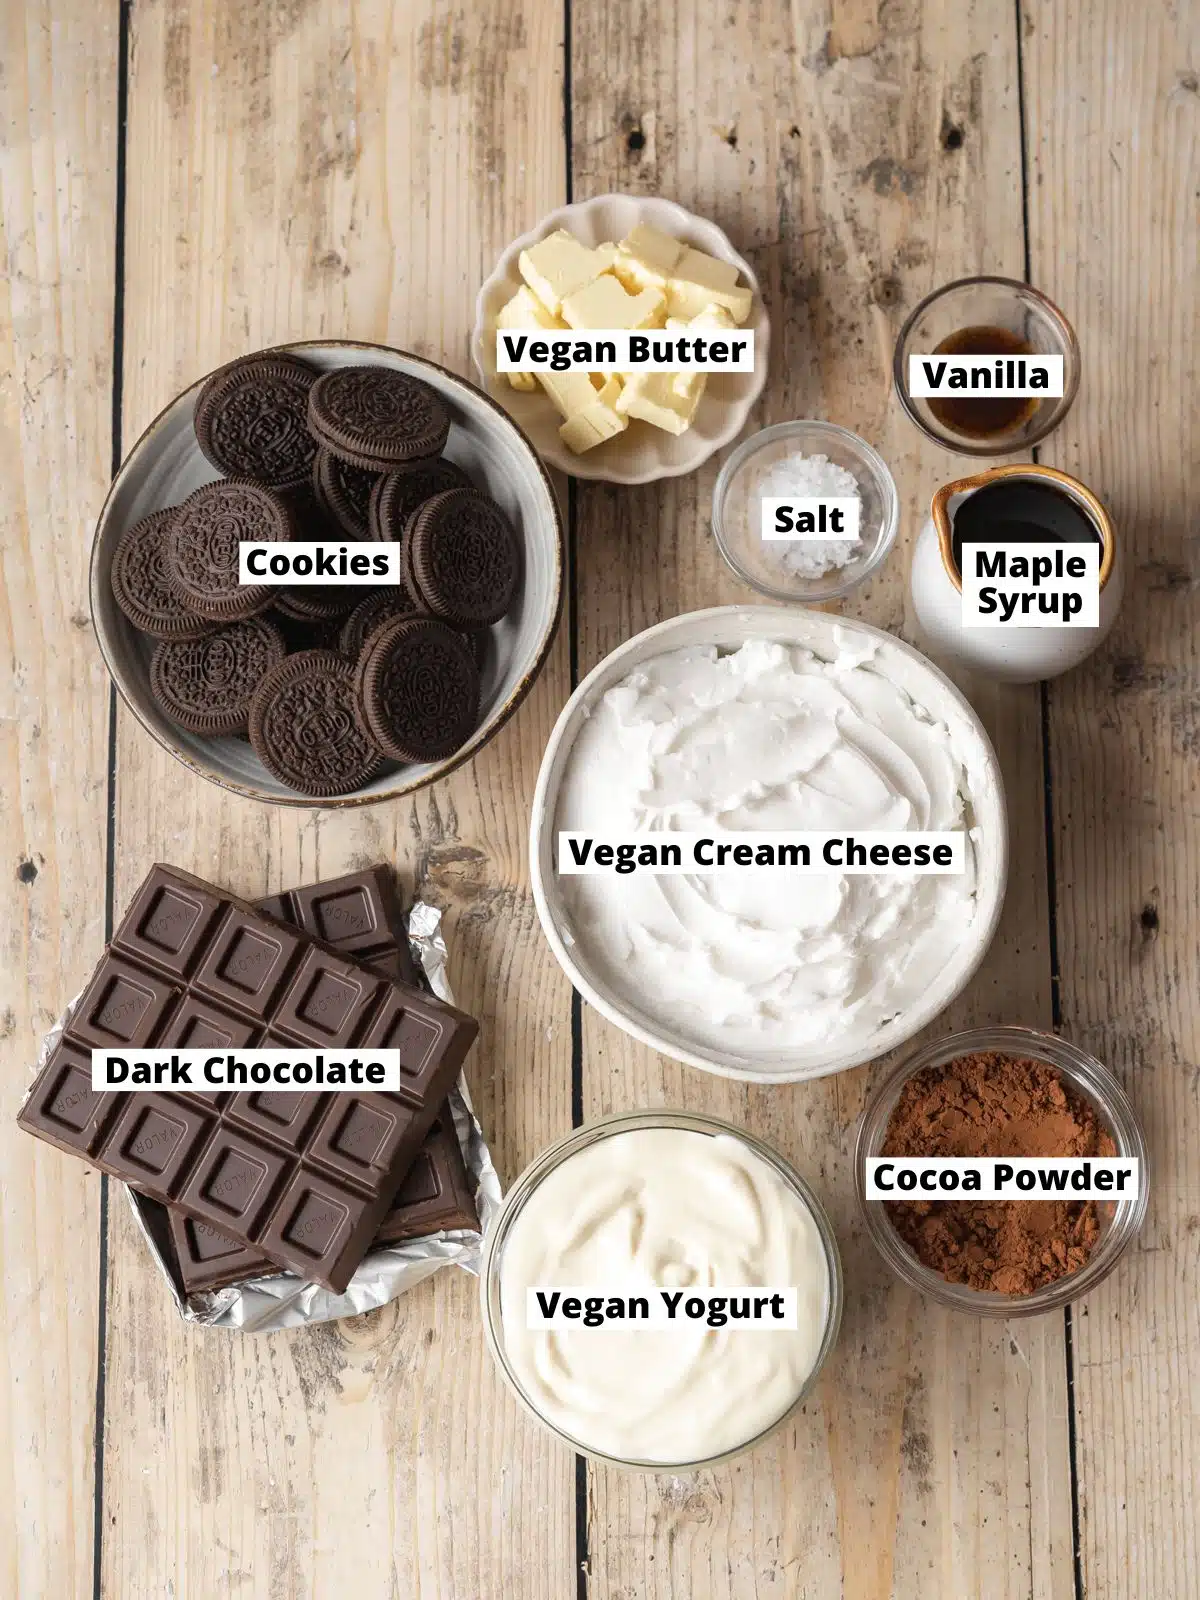 Ingredients needed to make vegan no-bake chocolate cheesecake measured out into bowls on a wooden table.